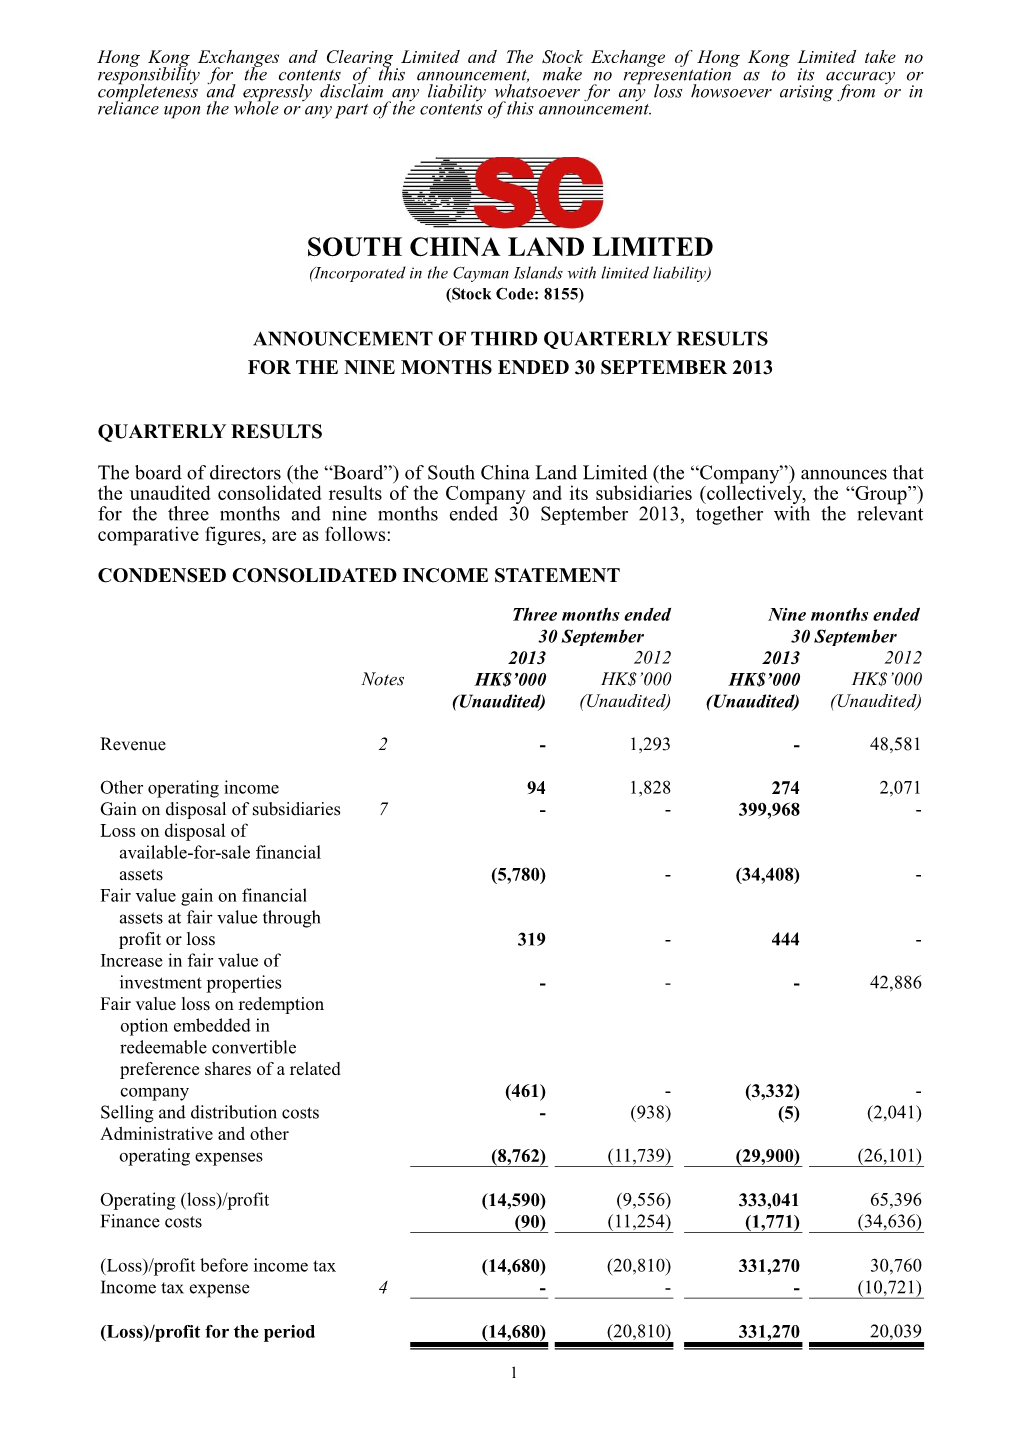 SOUTH CHINA LAND LIMITED (Incorporated in the Cayman Islands with Limited Liability) (Stock Code: 8155)